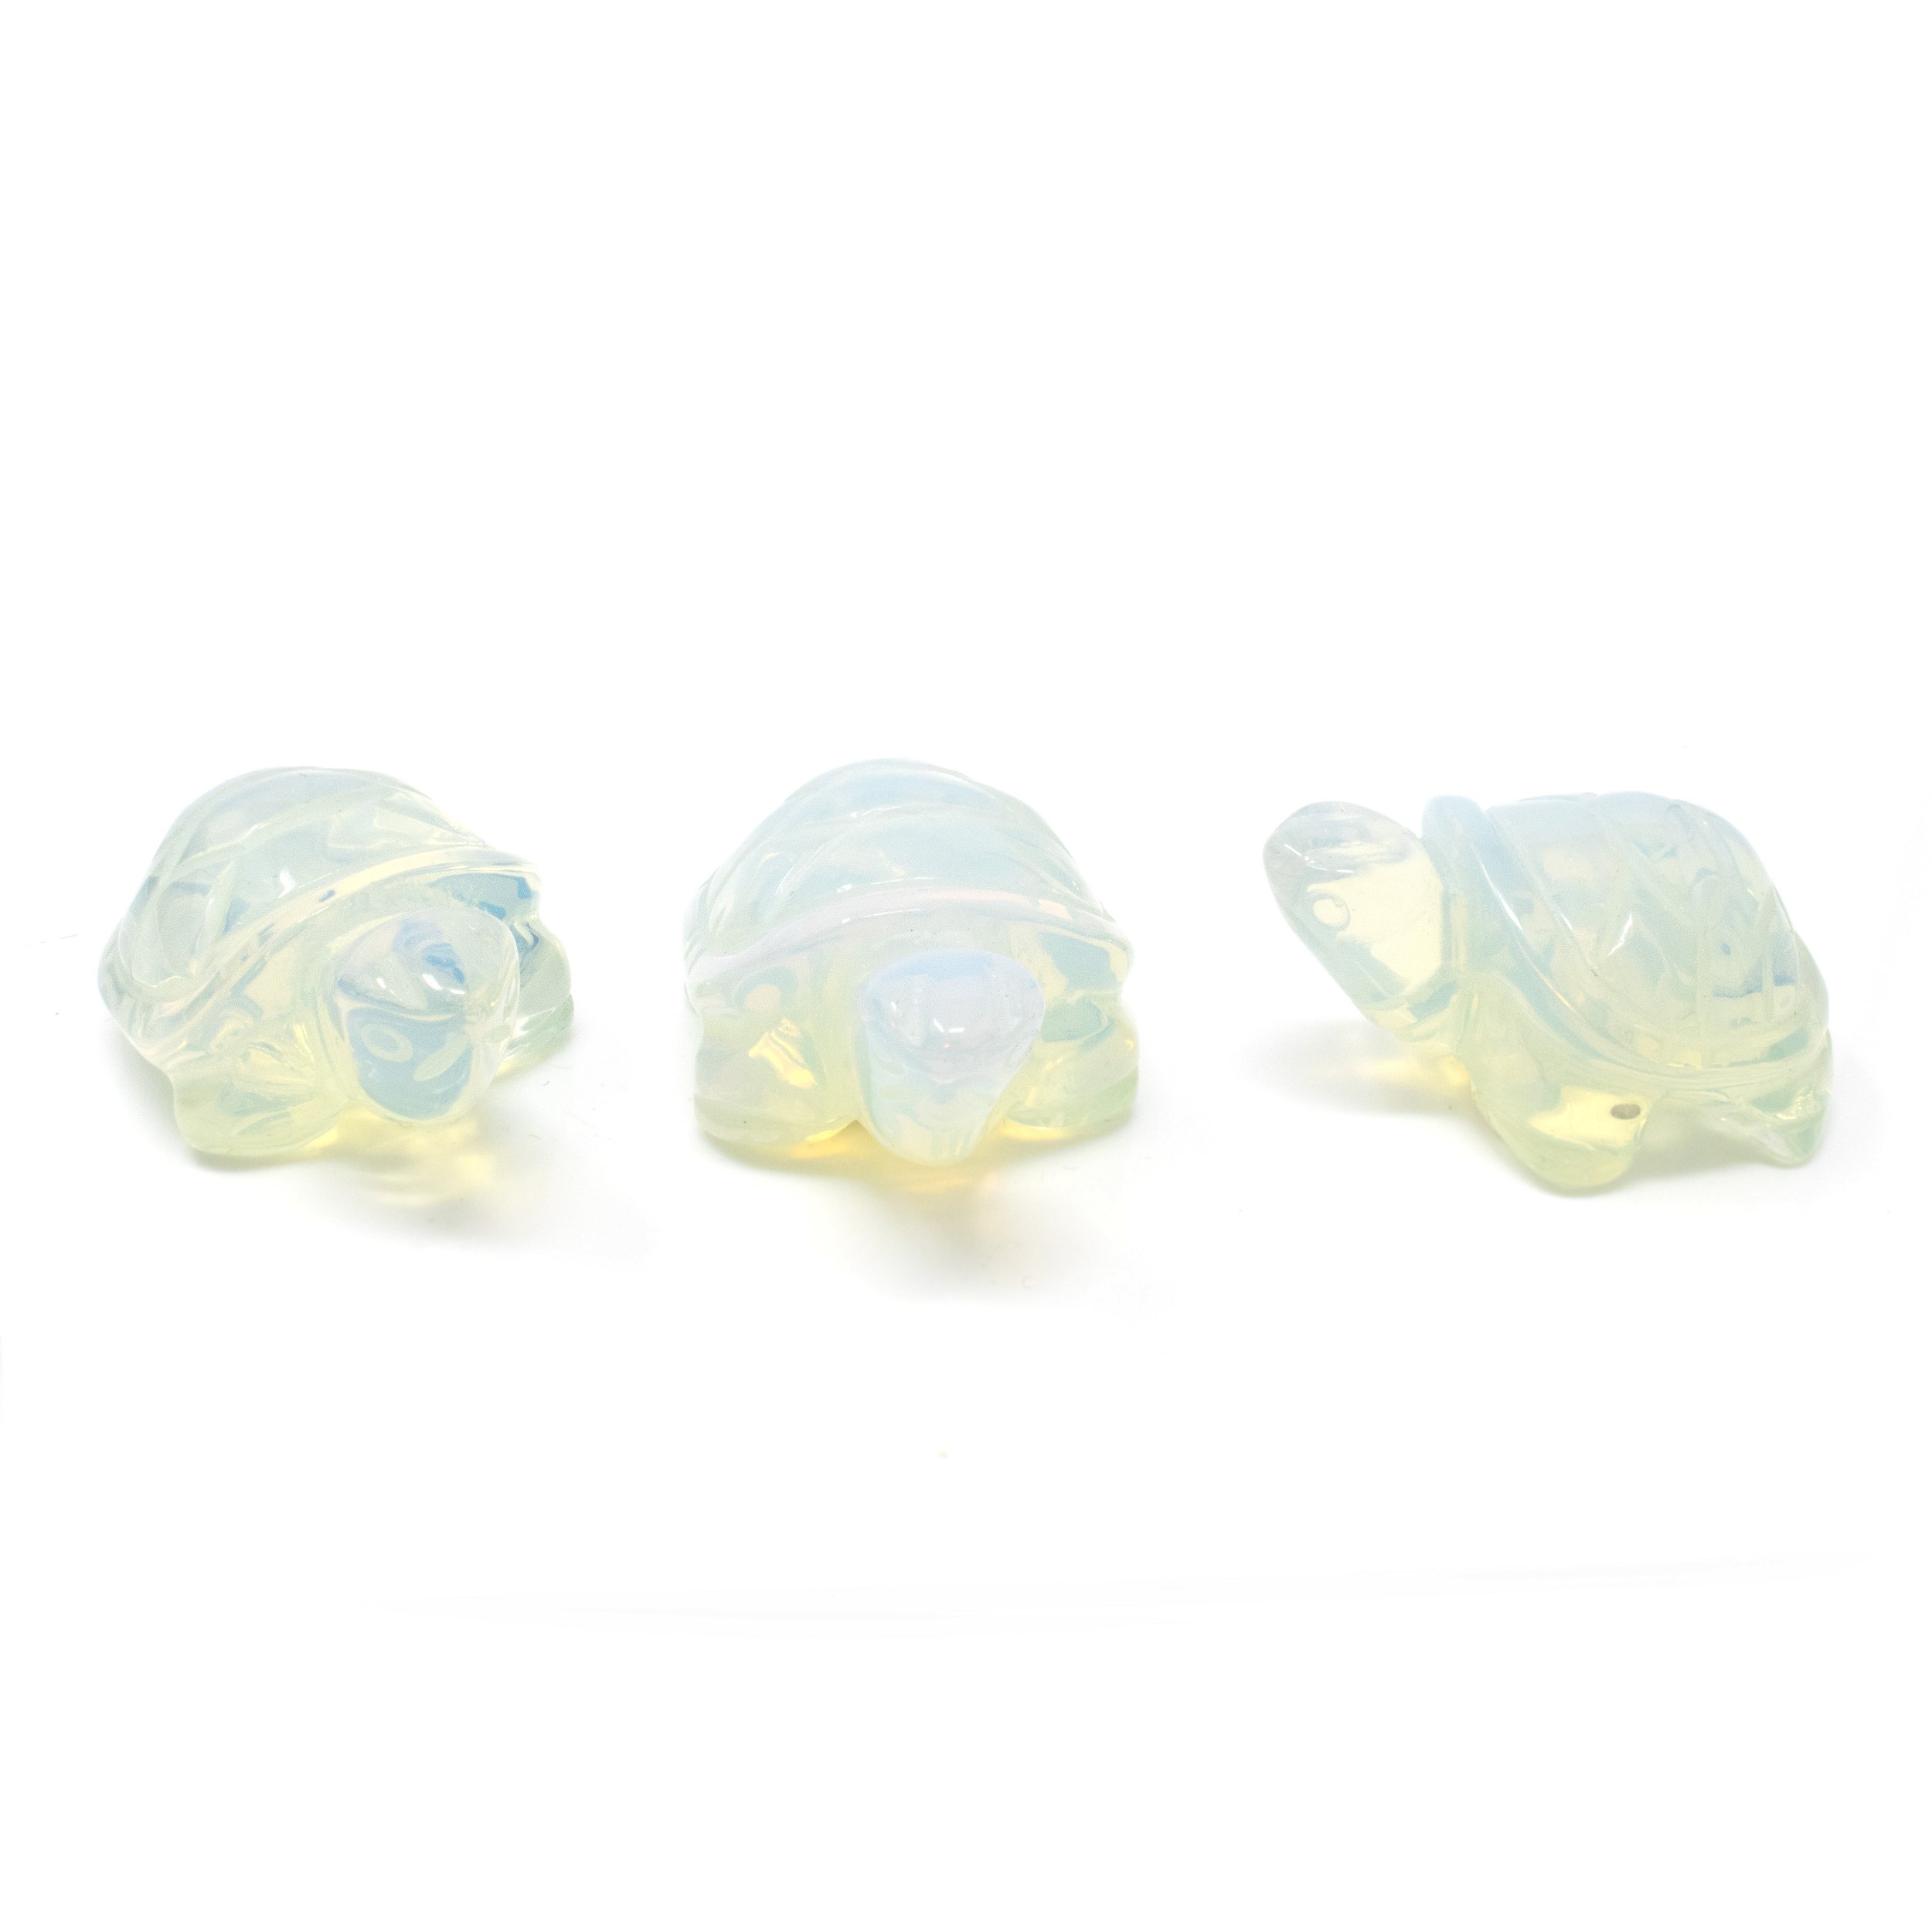 Opalite Turtle Carving -Sold in Singles